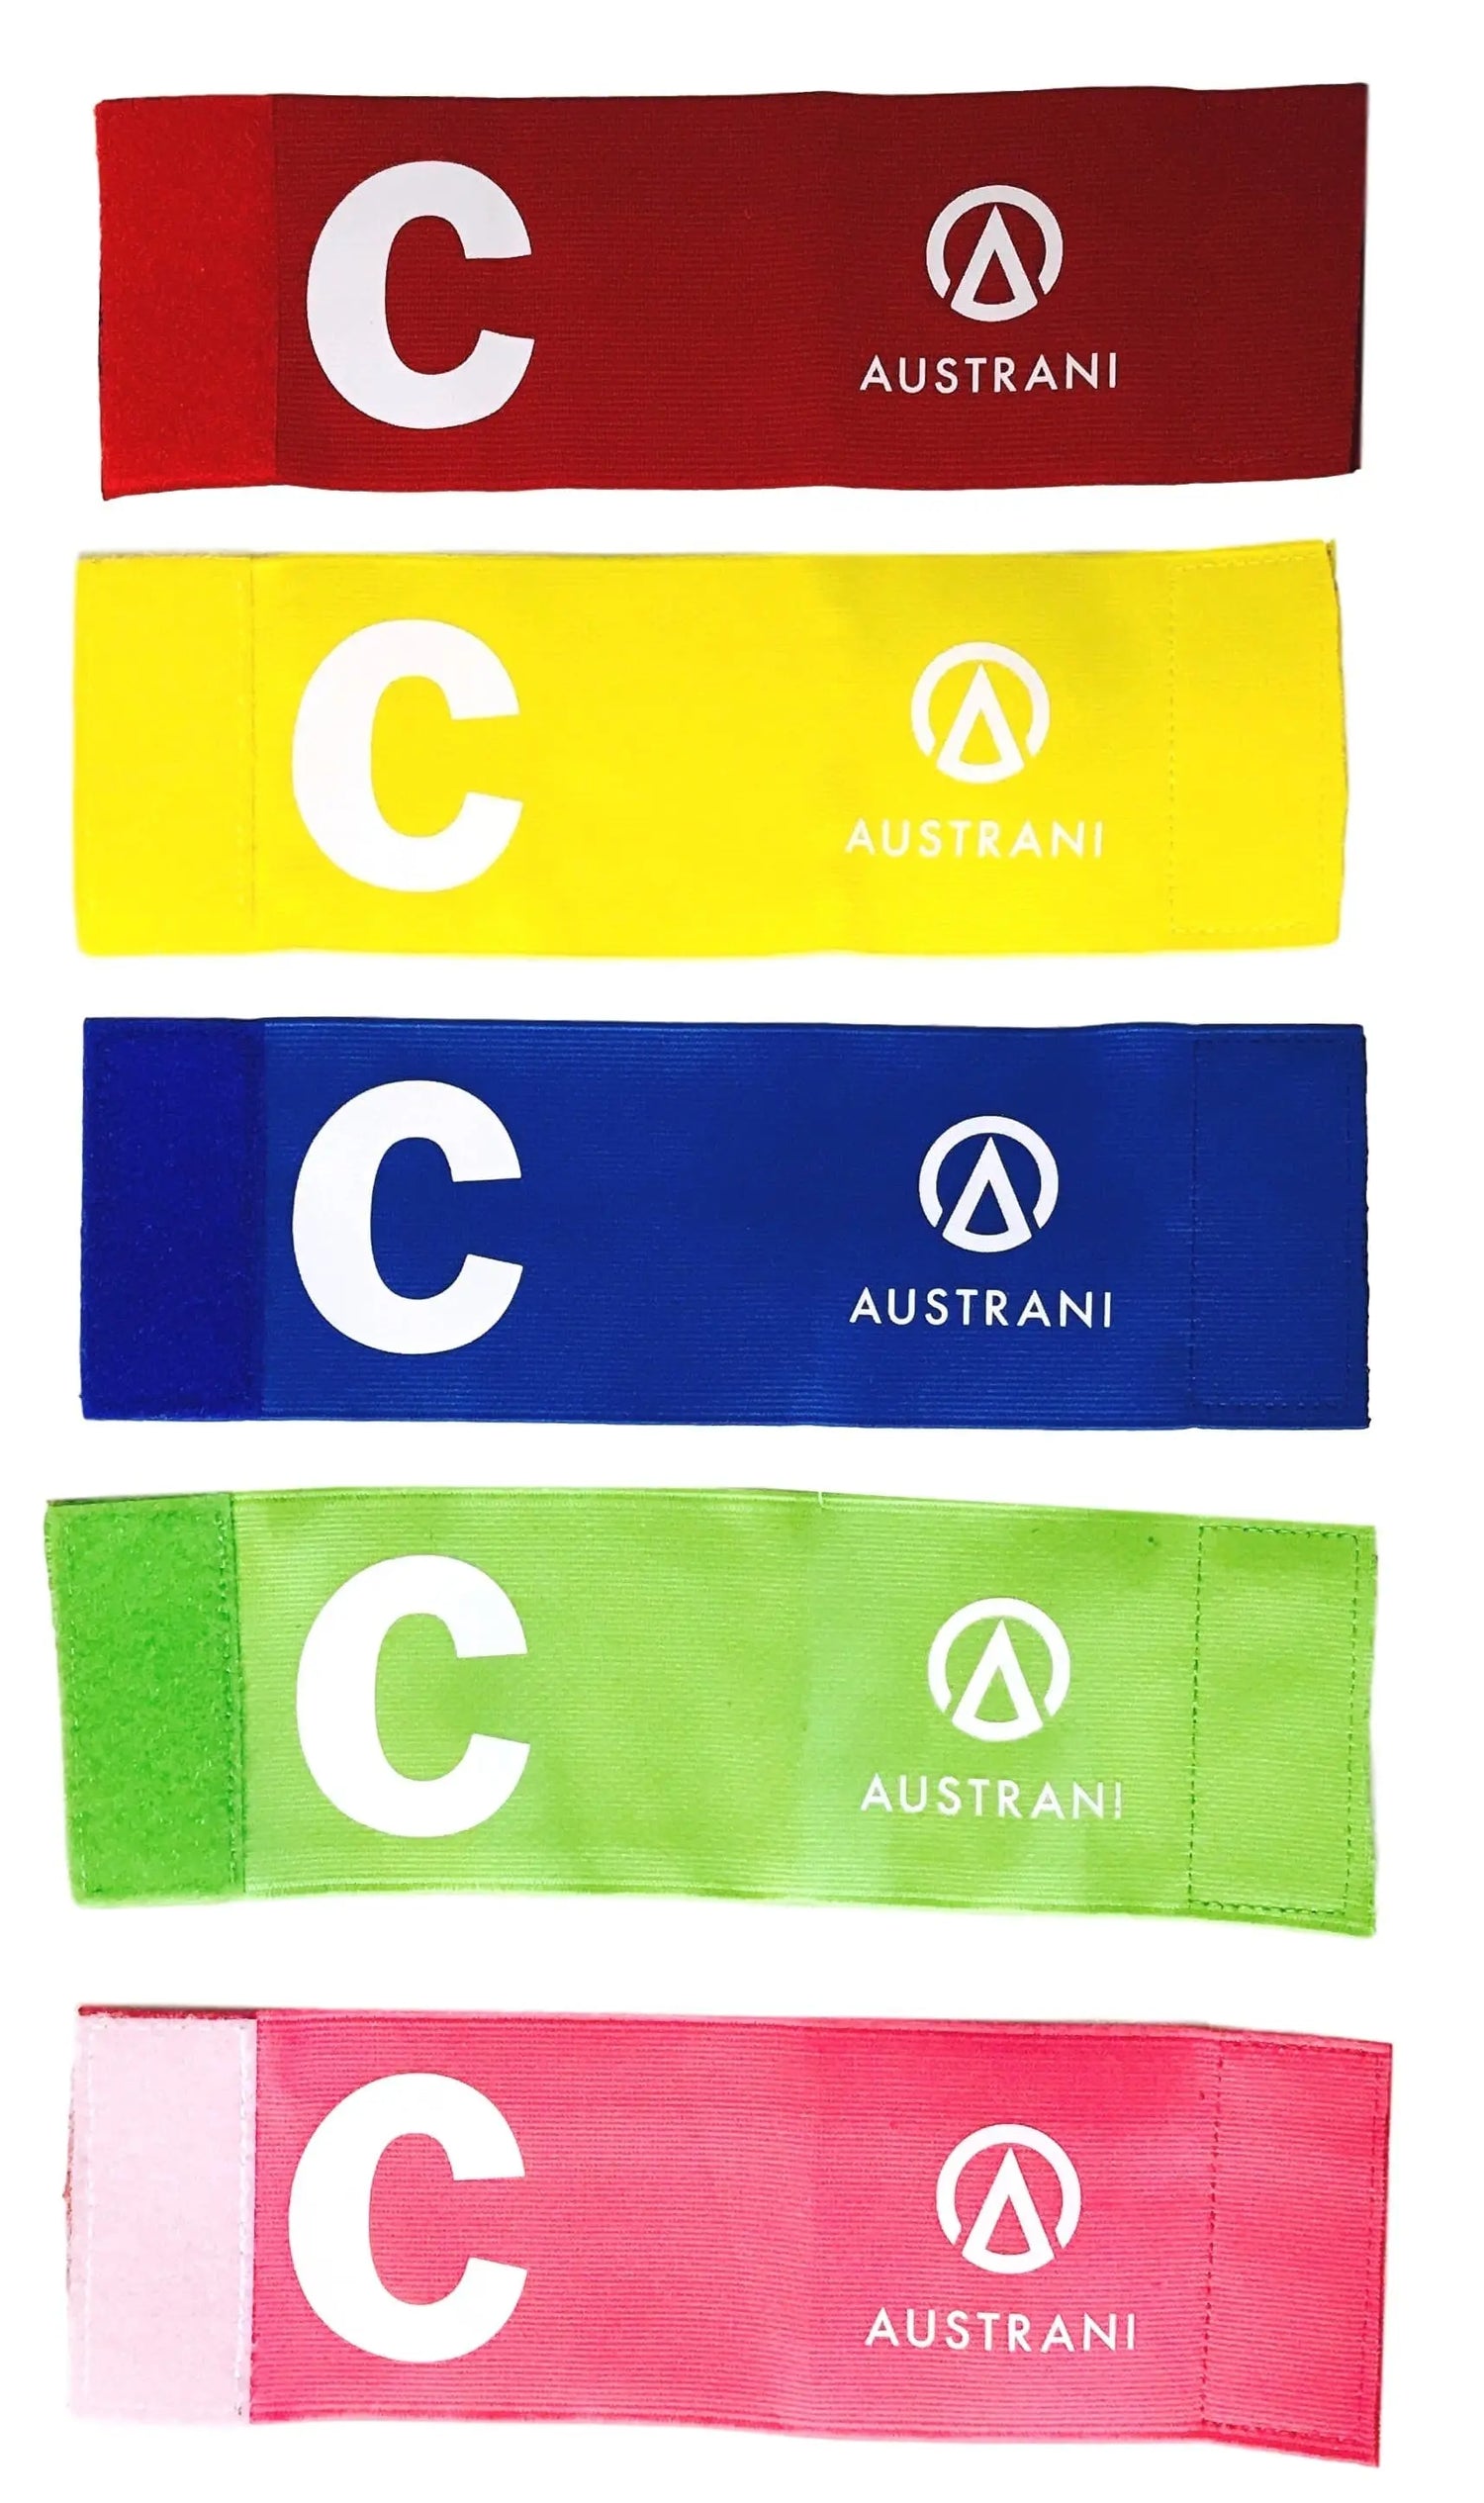 Austrani Football Soccer, Tennis, Sports Captain Elastic Armband for Youth Players, Pack of 5 Racquet Point